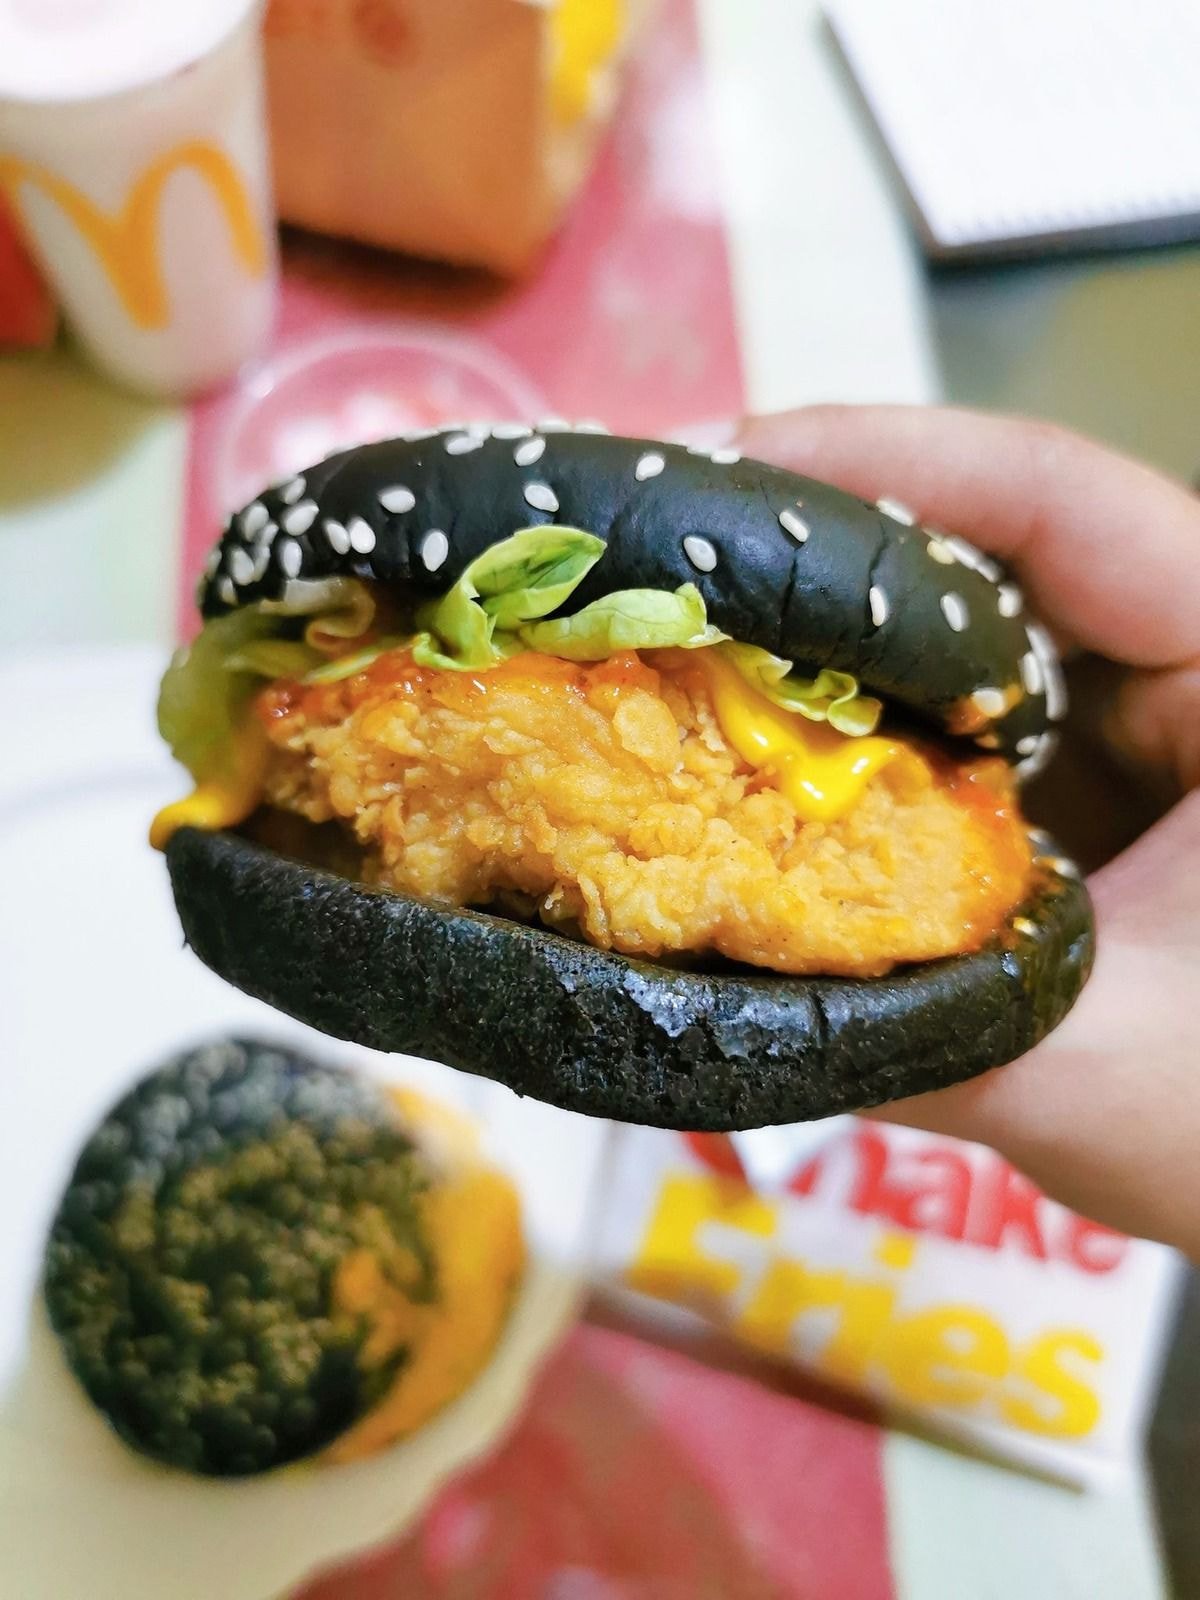 K-burgers sold in the Philippines.